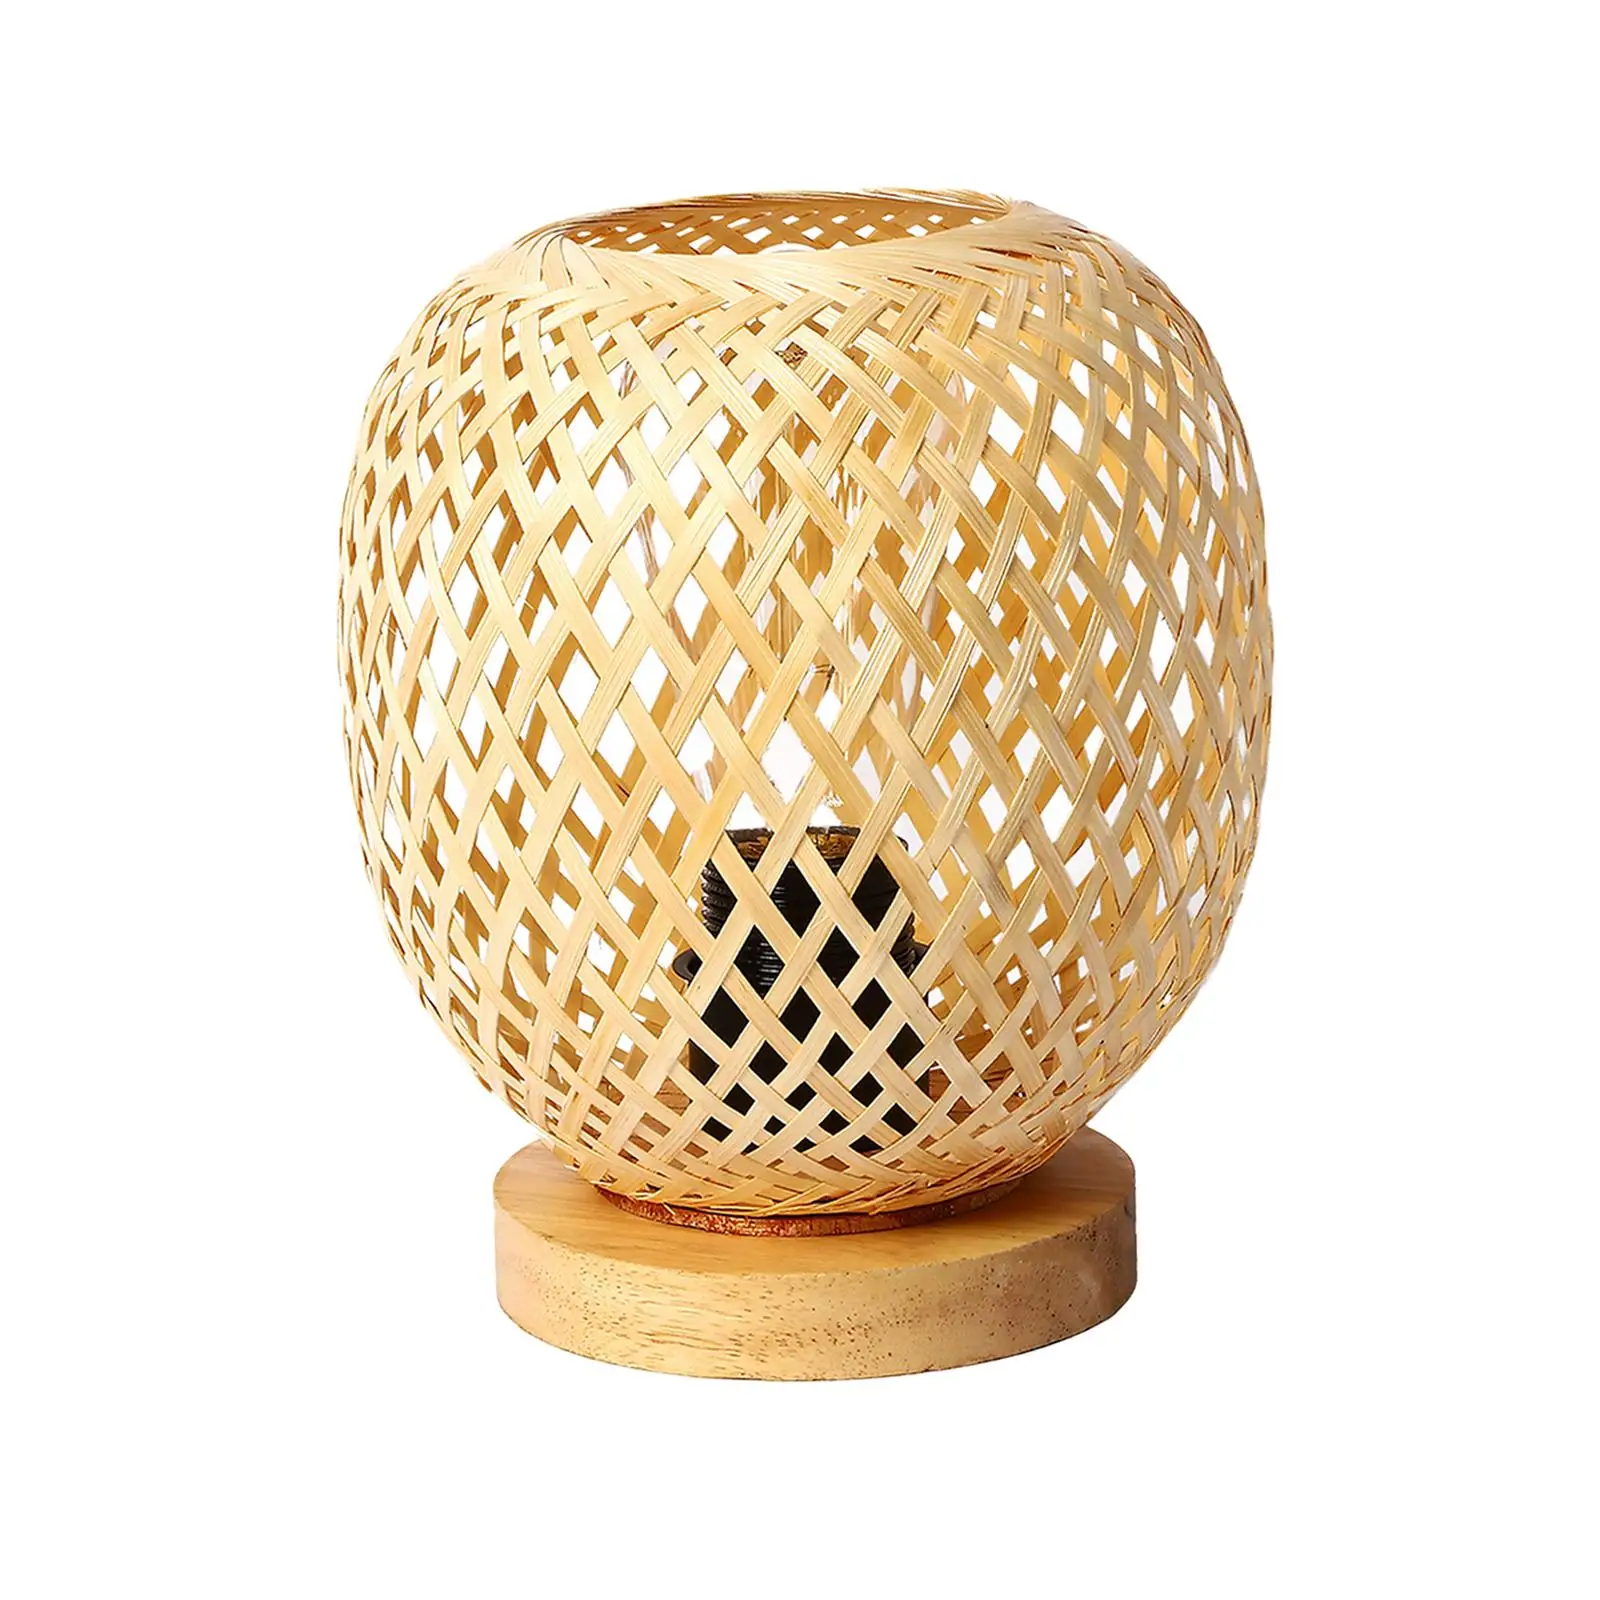 Rattan Table Lamps Standing Lamp Desk Lamp Decorative Devices W/ Wooden Base Rustic for Bedside Home Photo Props Bedroom US Plug